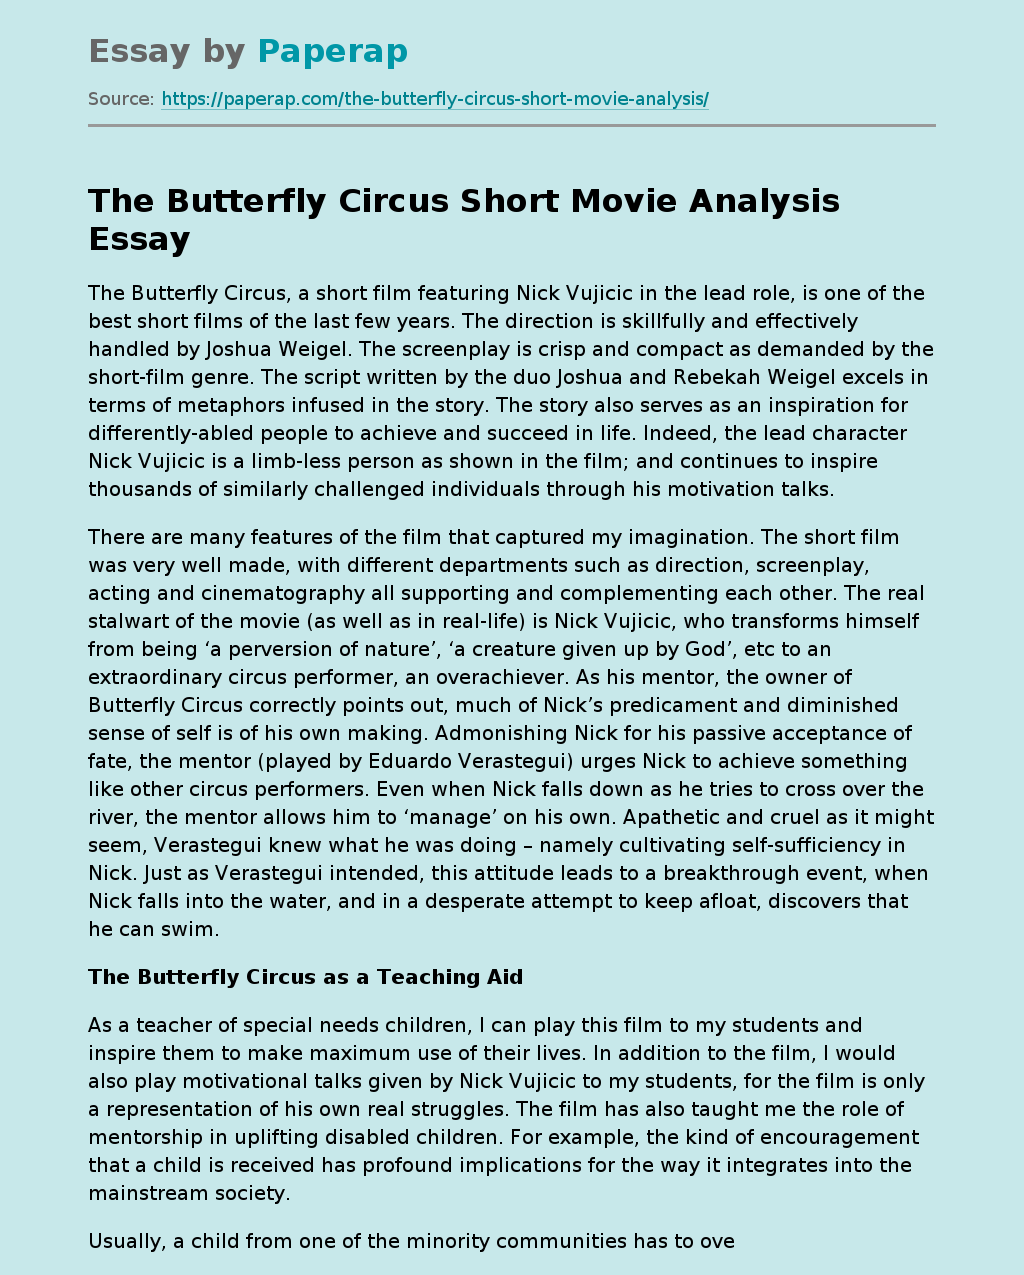 The Butterfly Circus Short Movie Analysis